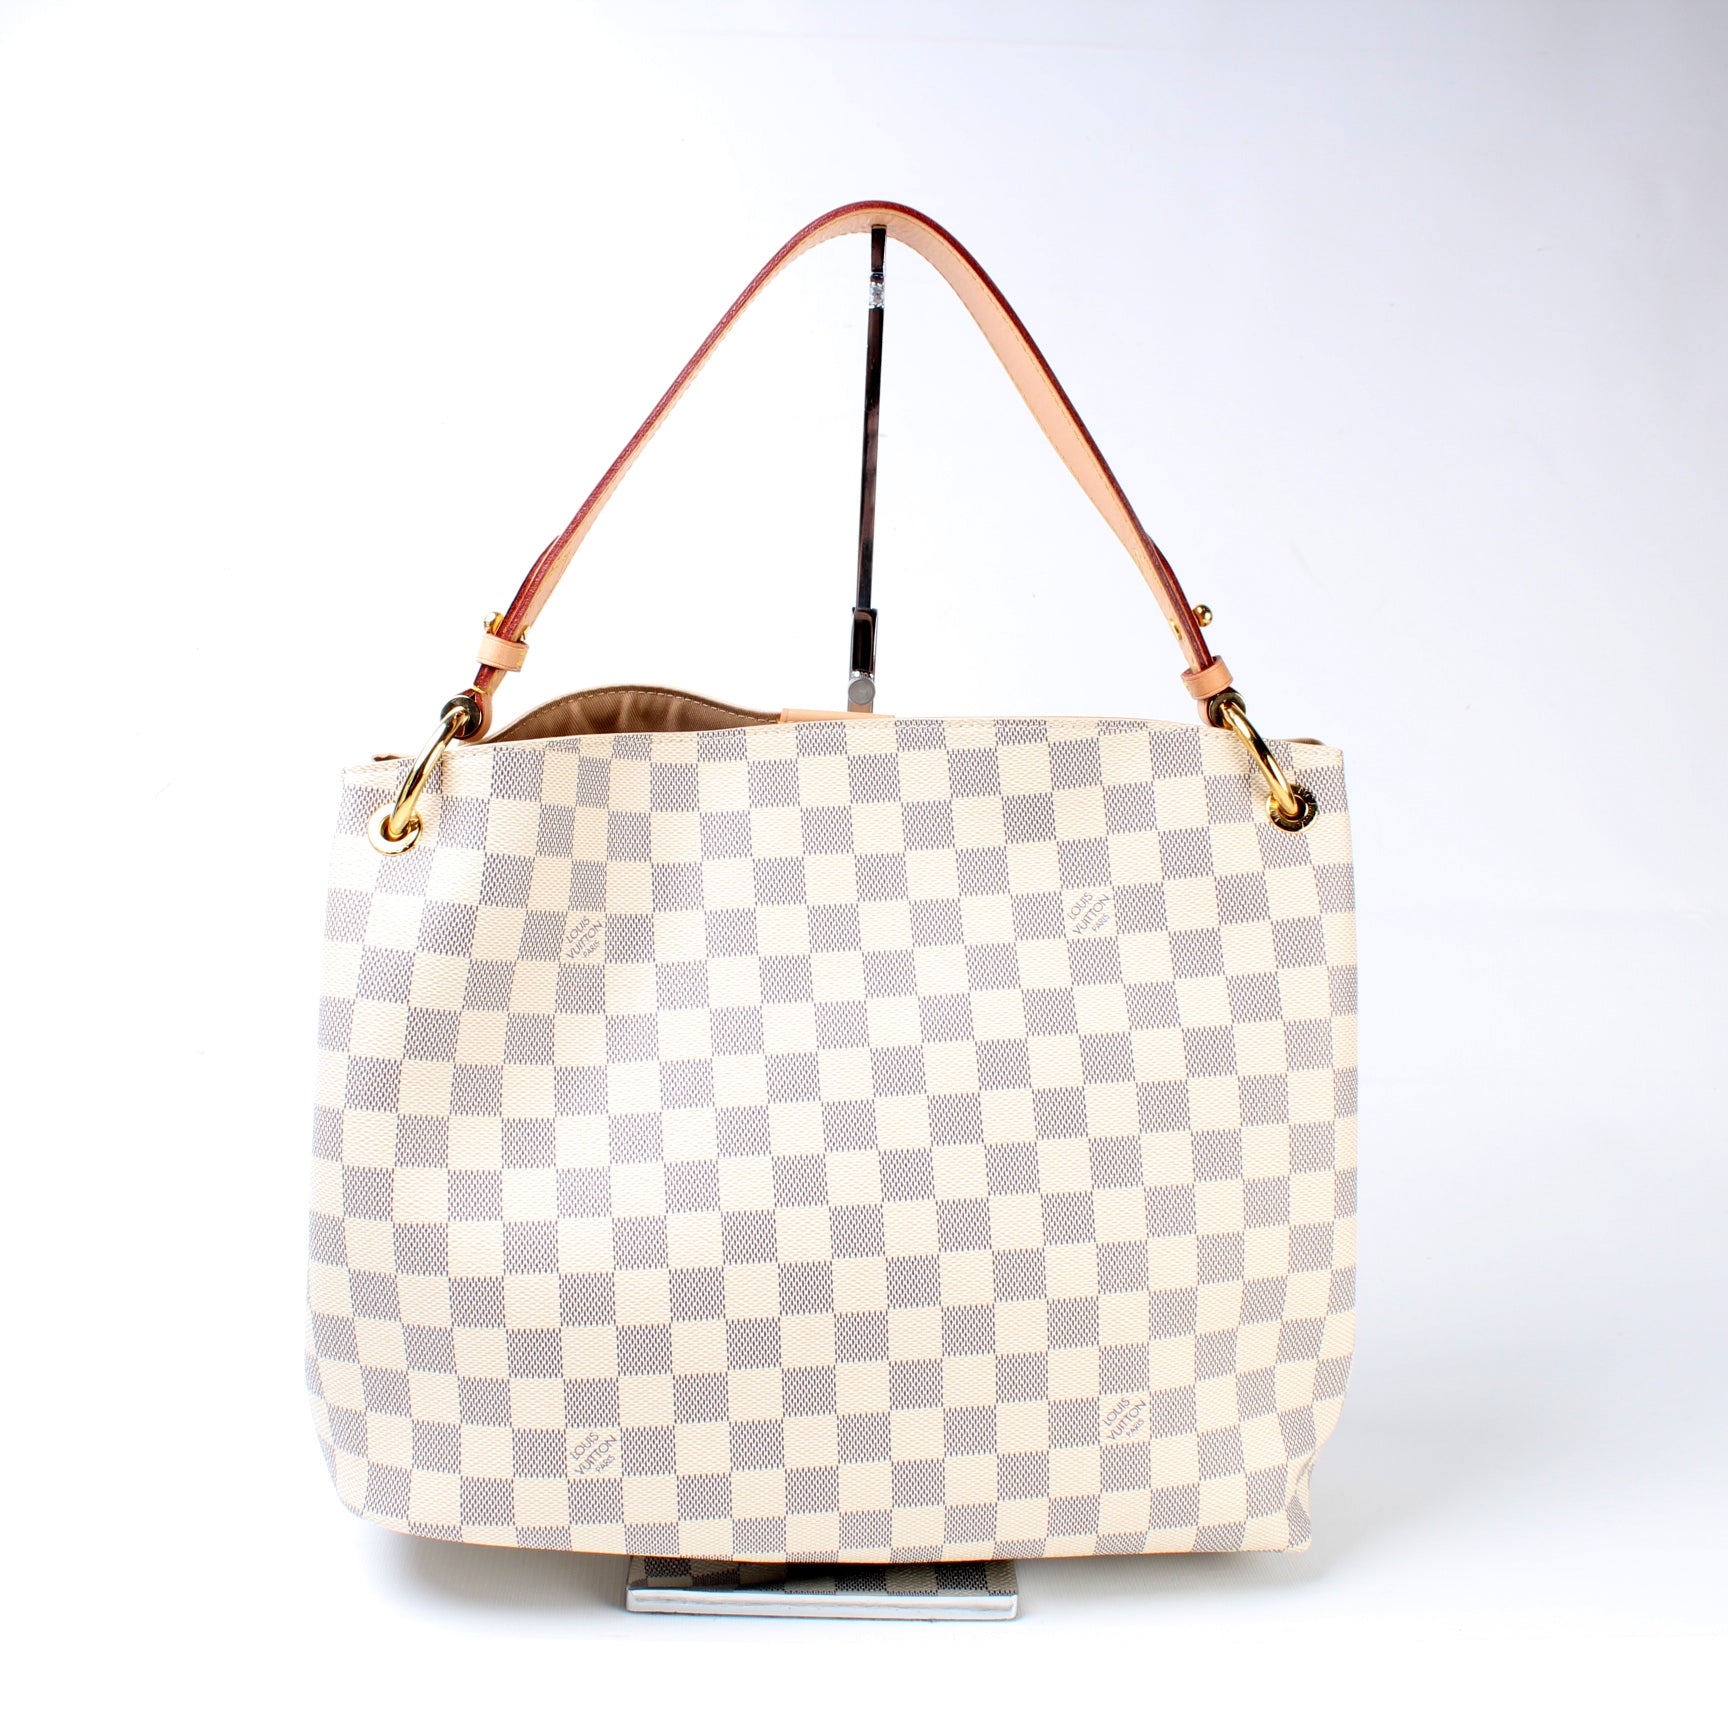 Louis Vuitton Neverfull GM Damier Tote bag $699.99 comes with certificate  of authenticity